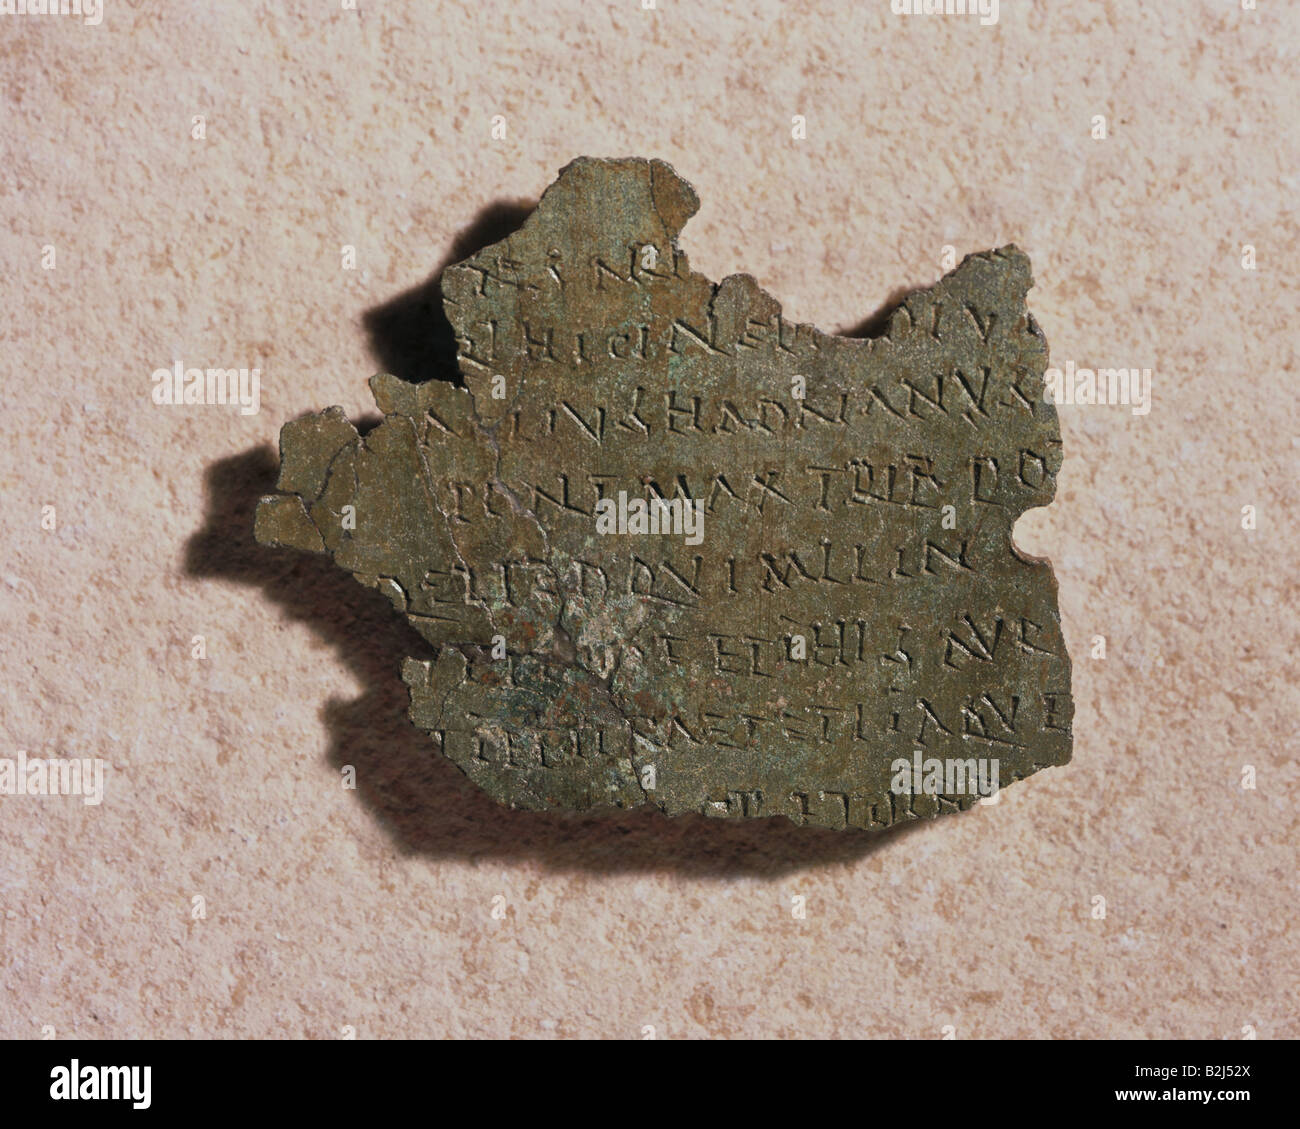 military, ancient world, Roman Empire, military diploma for a soldier of the auxiliary forces, bronze, Oberschneiding, Lower Bavaria, circa 138/140 AD, Bavarian State Archaeological Collection, Munich, bestowal of citizenship, dokument, 2nd century, AD, Germany, historic, historical, ancient world, Stock Photo